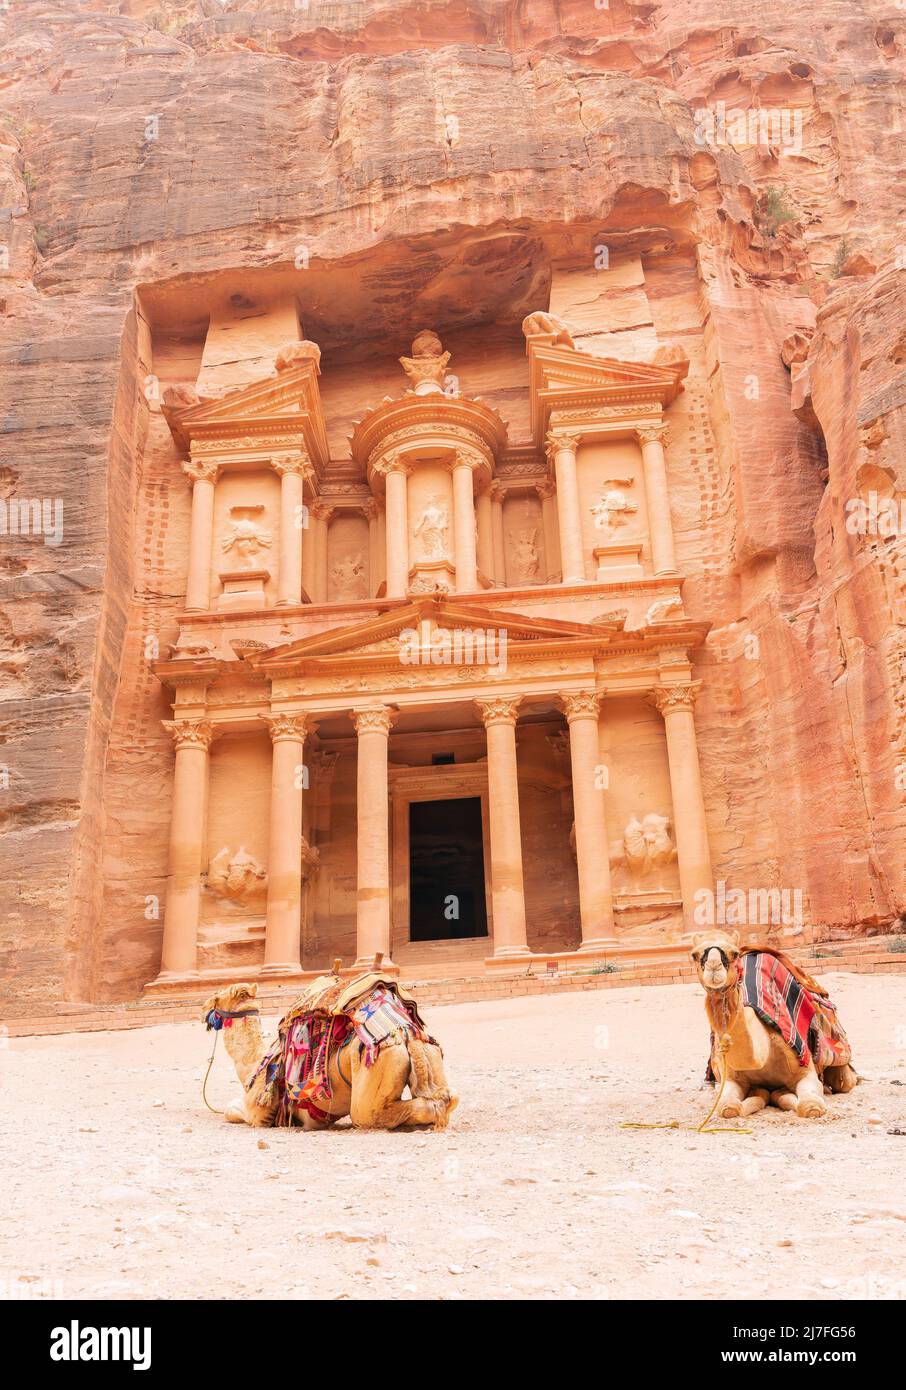 Spectacular view of two beautiful camels in front of Al Khazneh (The Treasury) at Petra. Petra is a historical and archaeological city in southern Jor Stock Photo